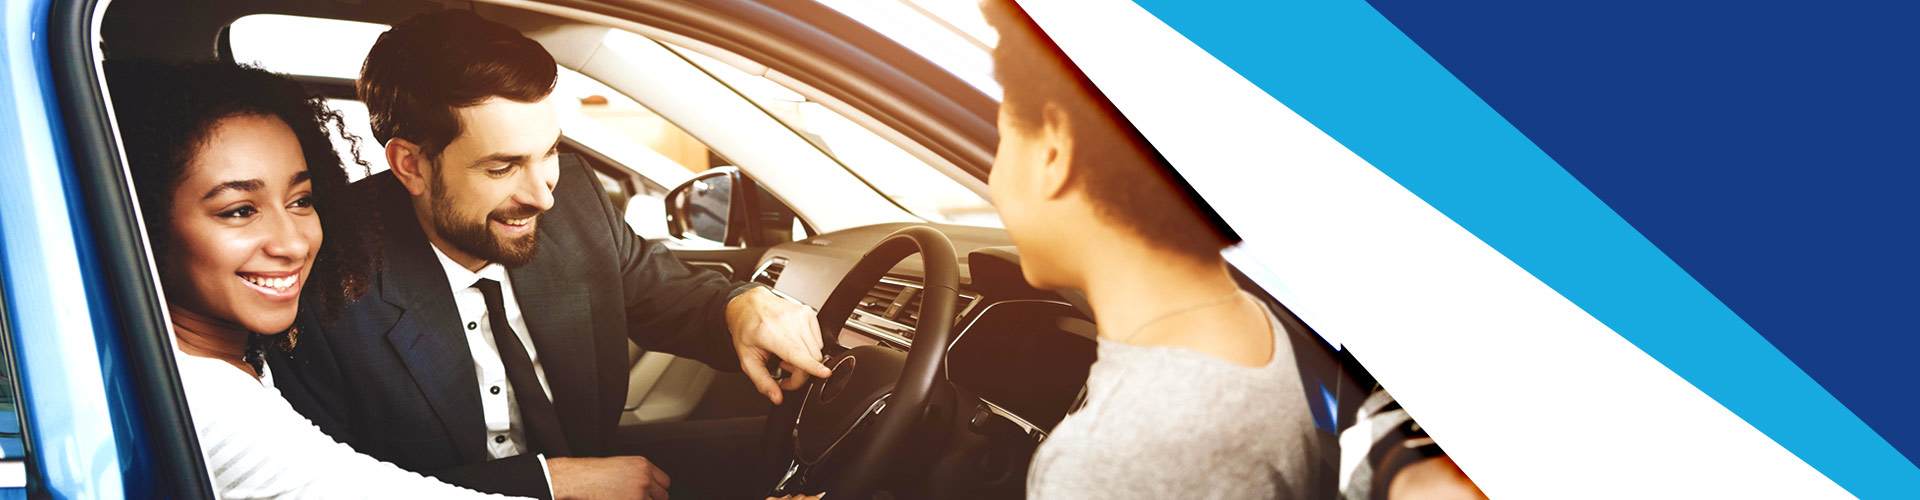 Get there with an Auto Loan from Dover Federal.